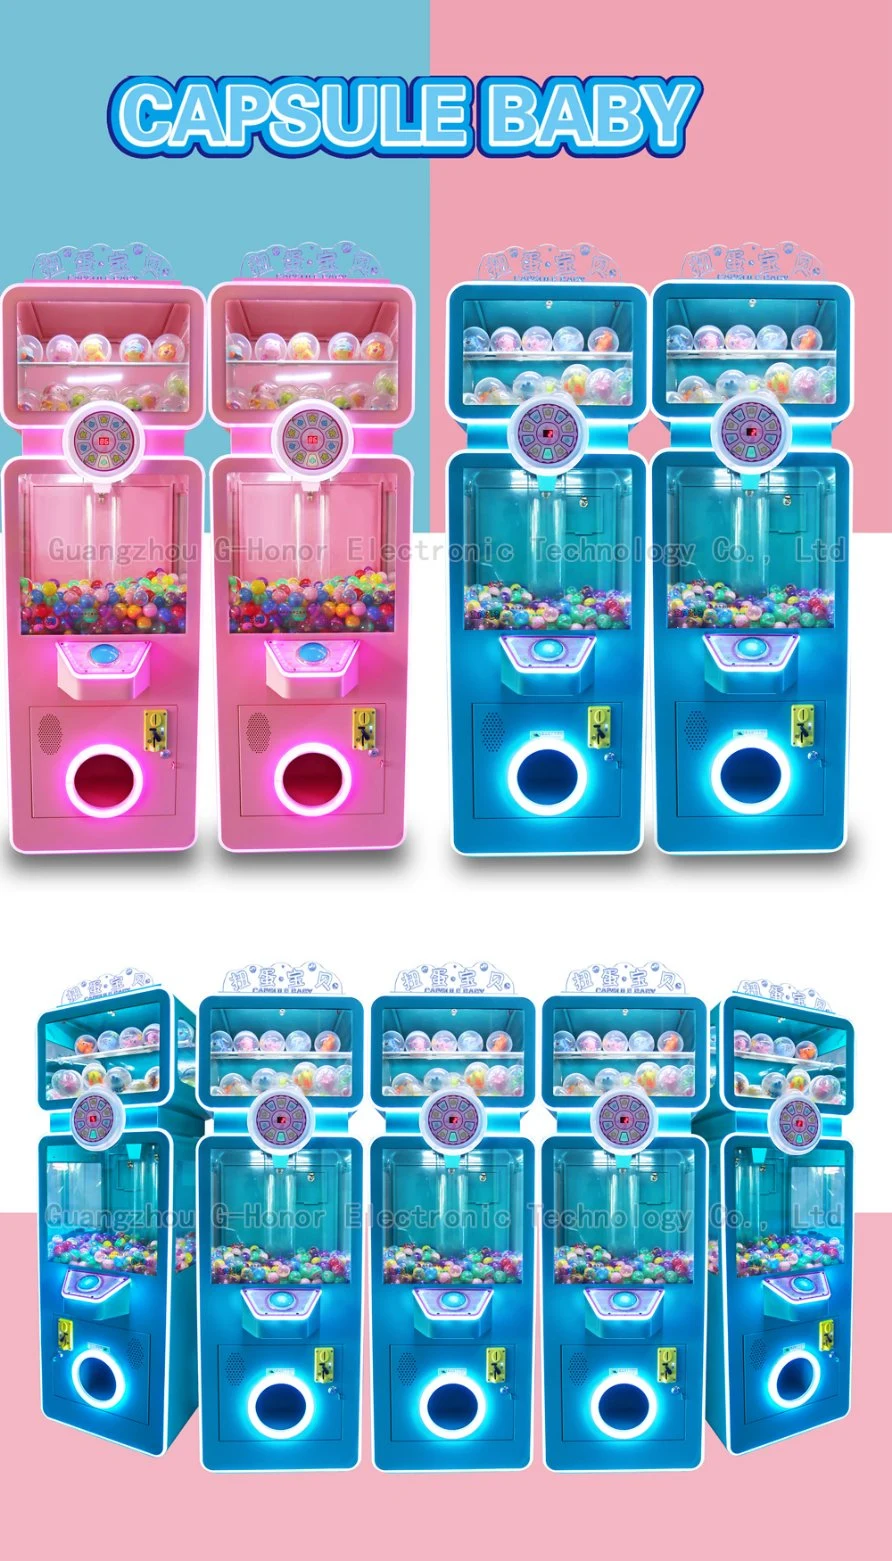 Electronic Arcade Prize Vending Game Coin Operated Capsule Toys Game Console Gashapon Game Machine Capsule Vending Game Machine Arcade Machine